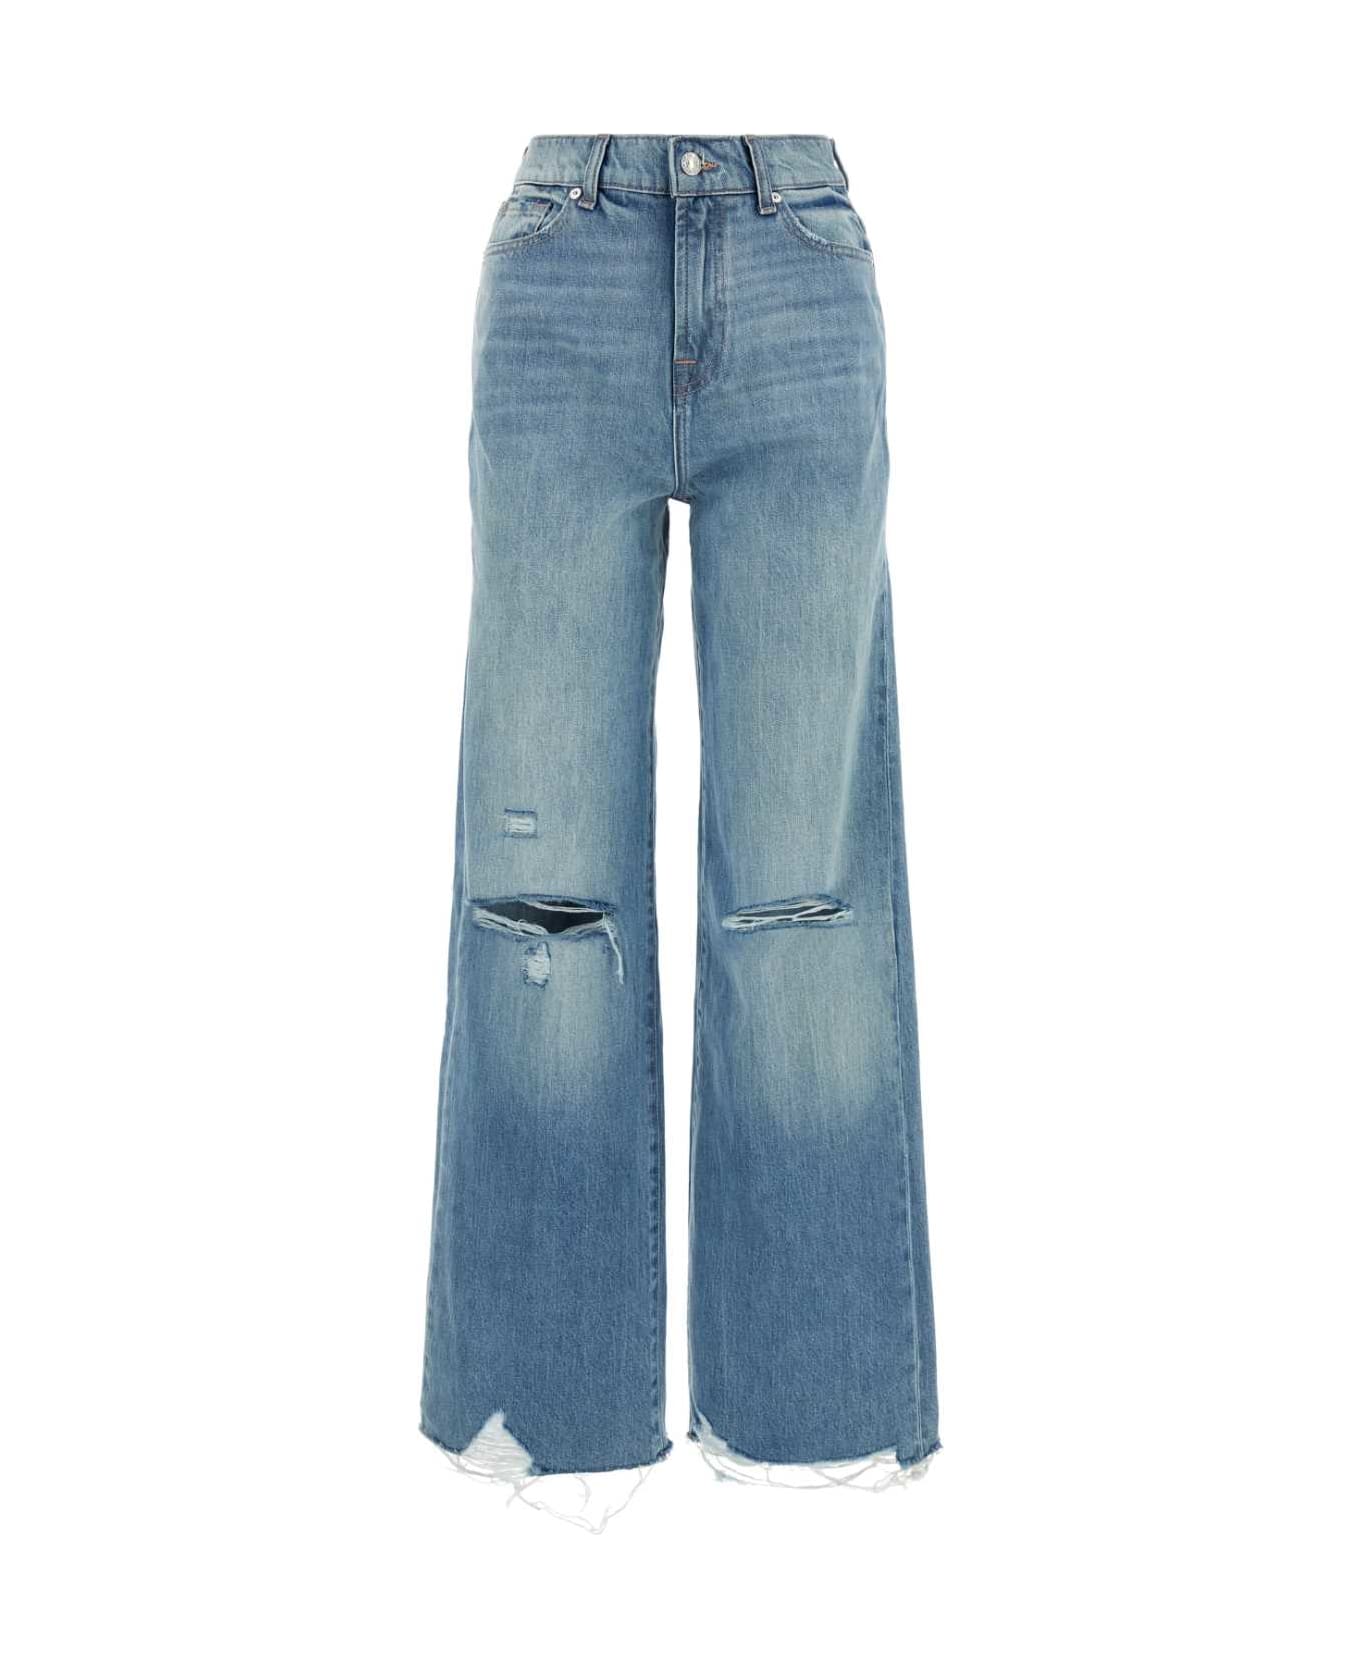 7 For All Mankind Denim Scout Wide-leg Jeans - MIDBLUE デニム